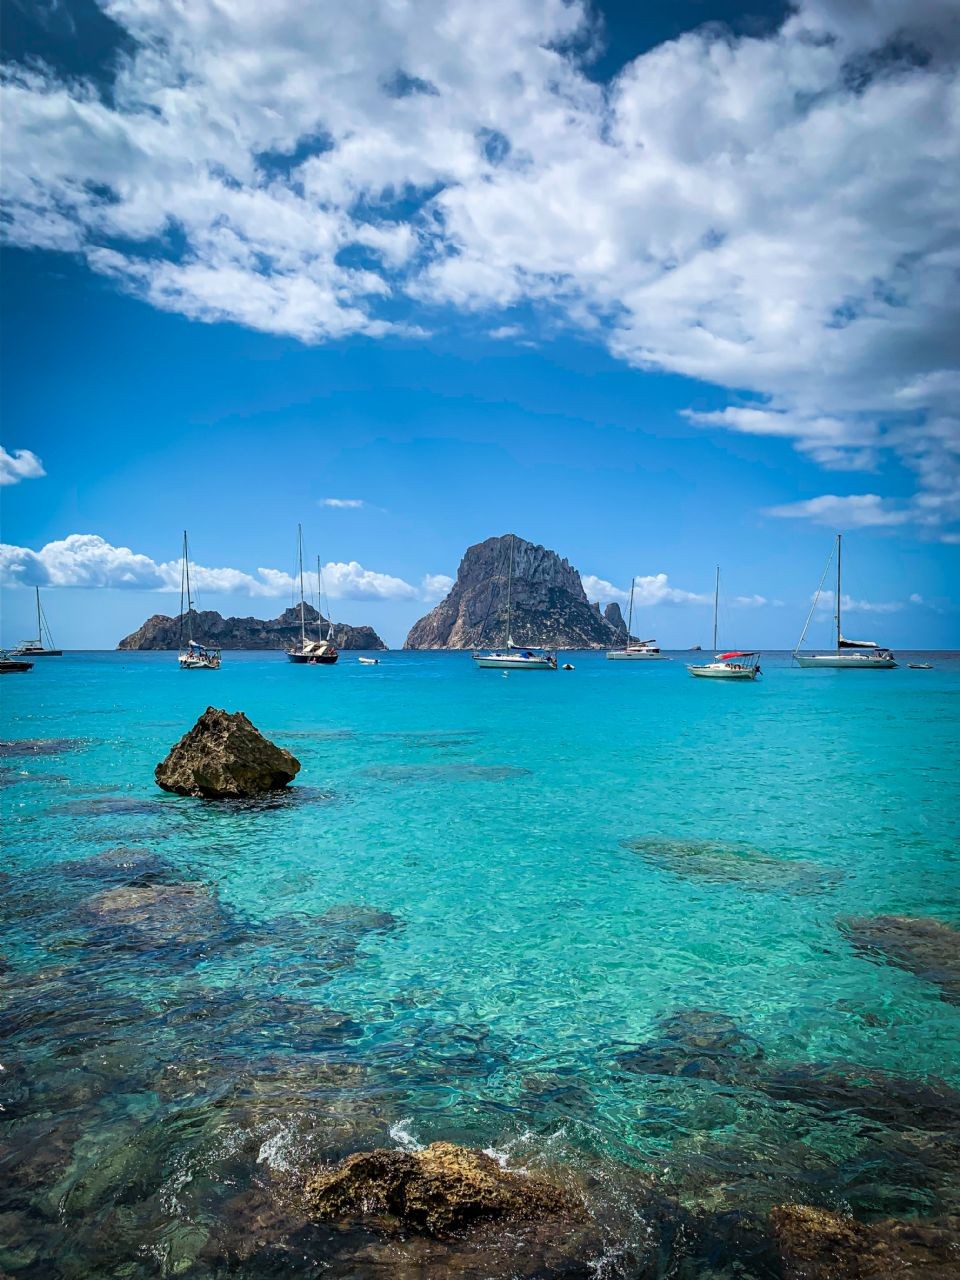 The best time to visit Ibiza is between May and October, when the weather is warm and sunny.